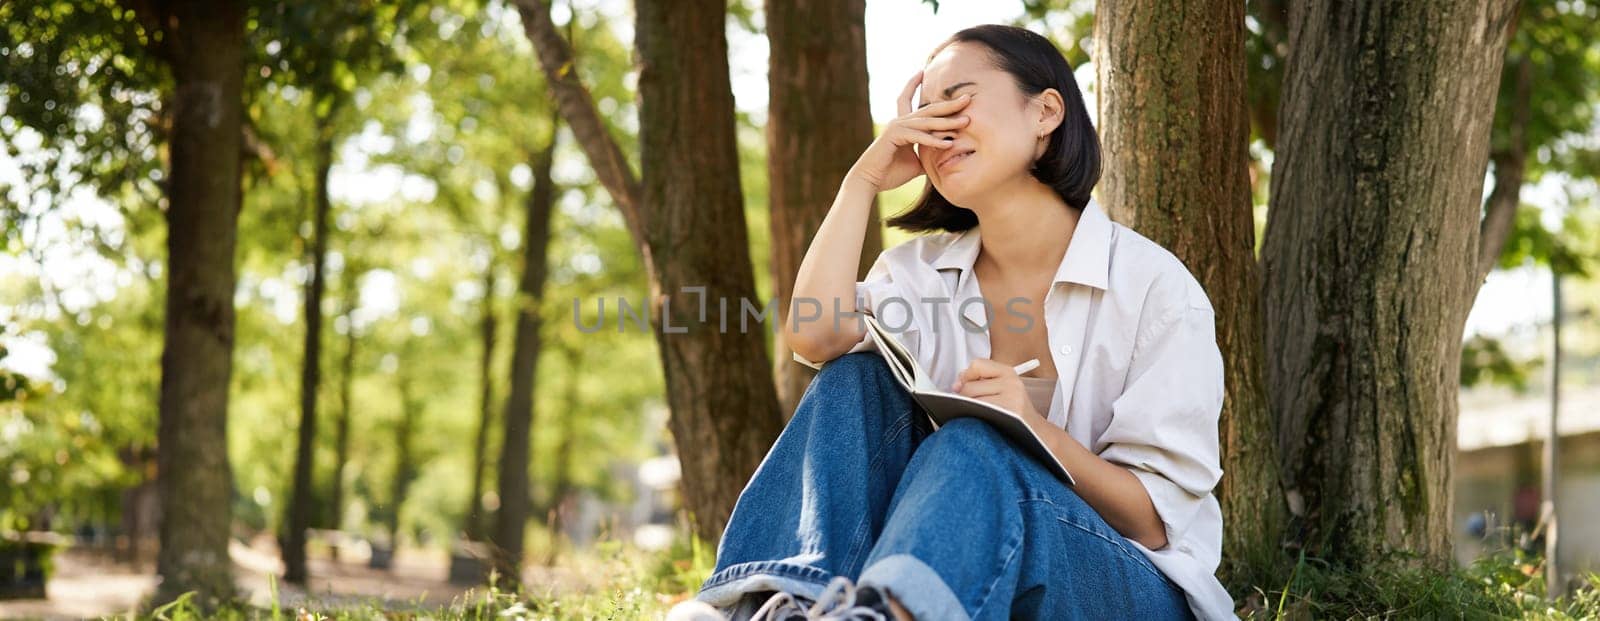 Sad girl crying while writing in her diary, sitting alone under tree in park with her notebook, sobbing and grimacing.